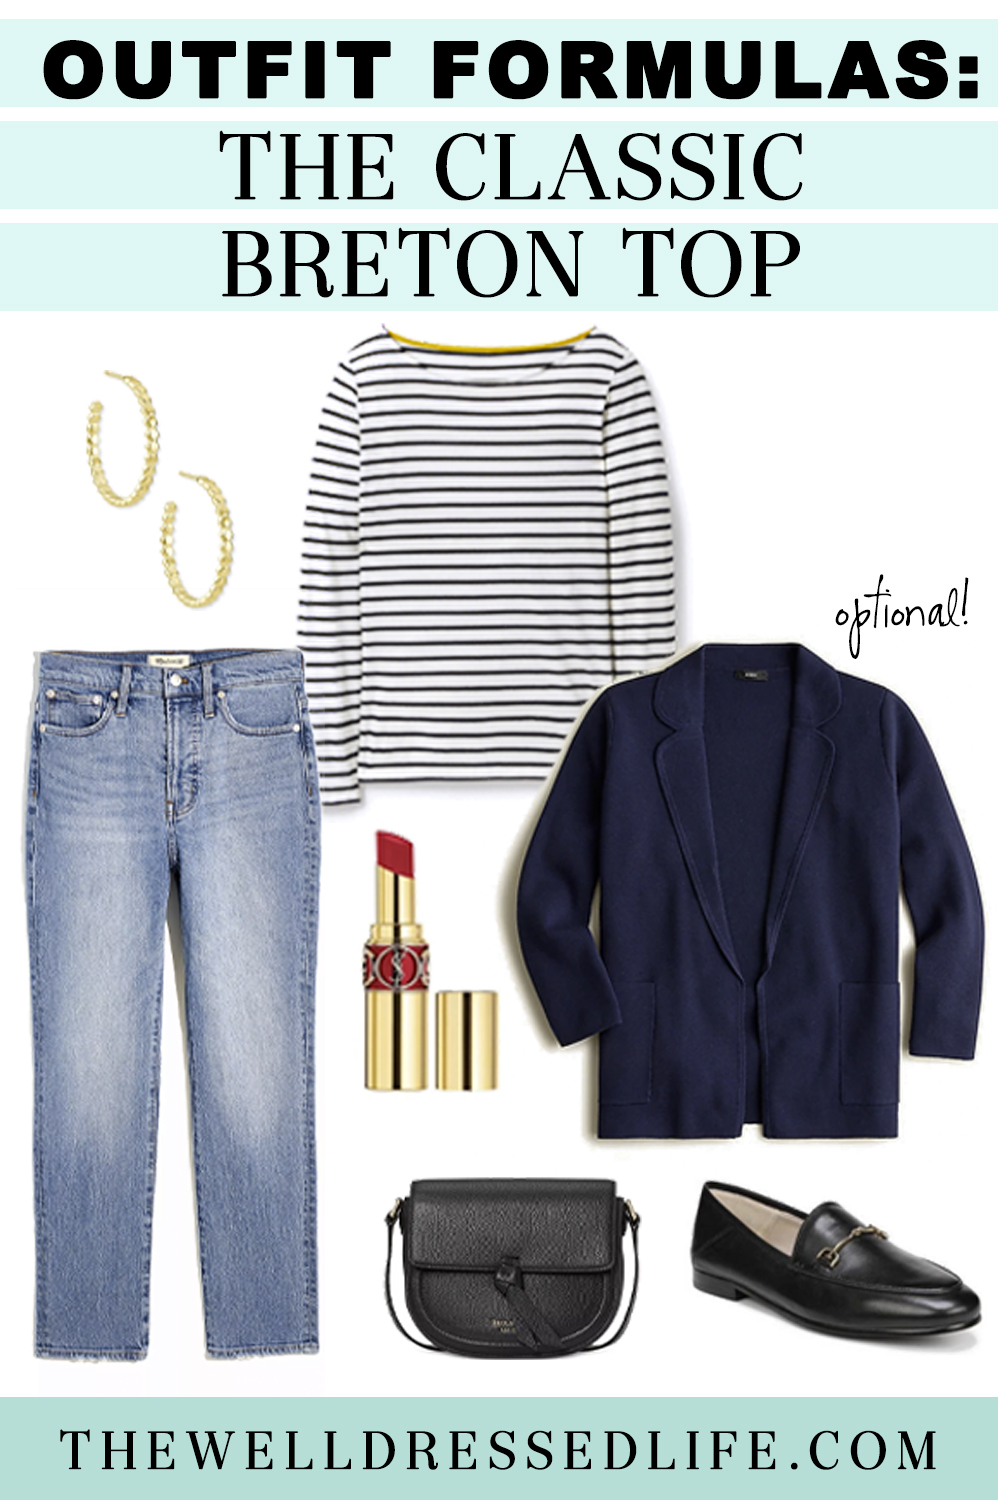 Outfit Formula #5: The Classic Breton Top